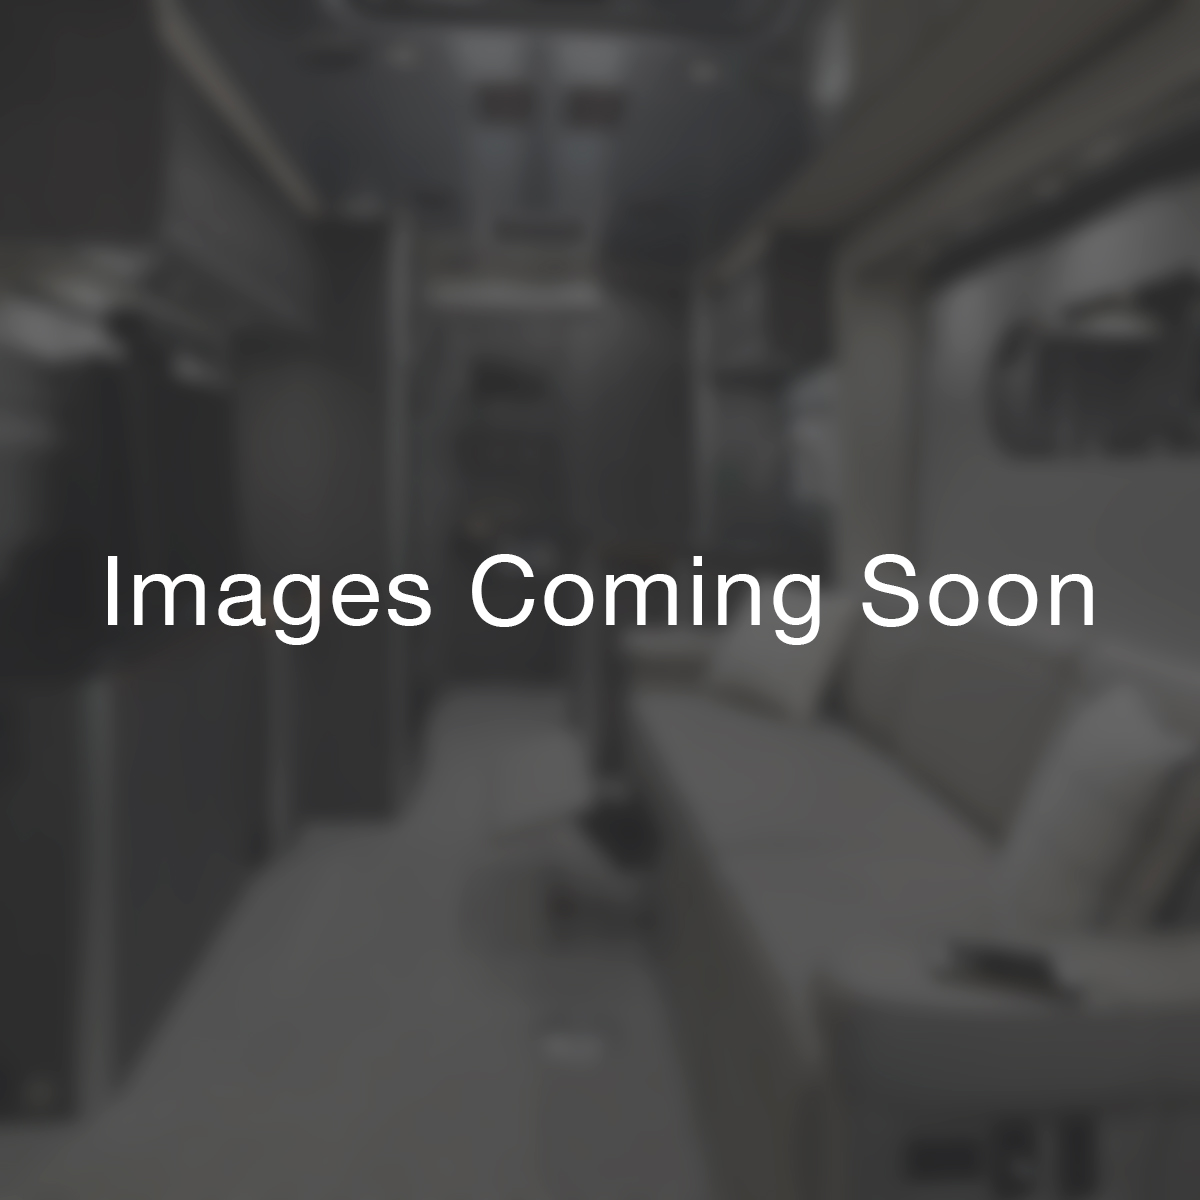 Atlas-Images-Coming-Soon-3